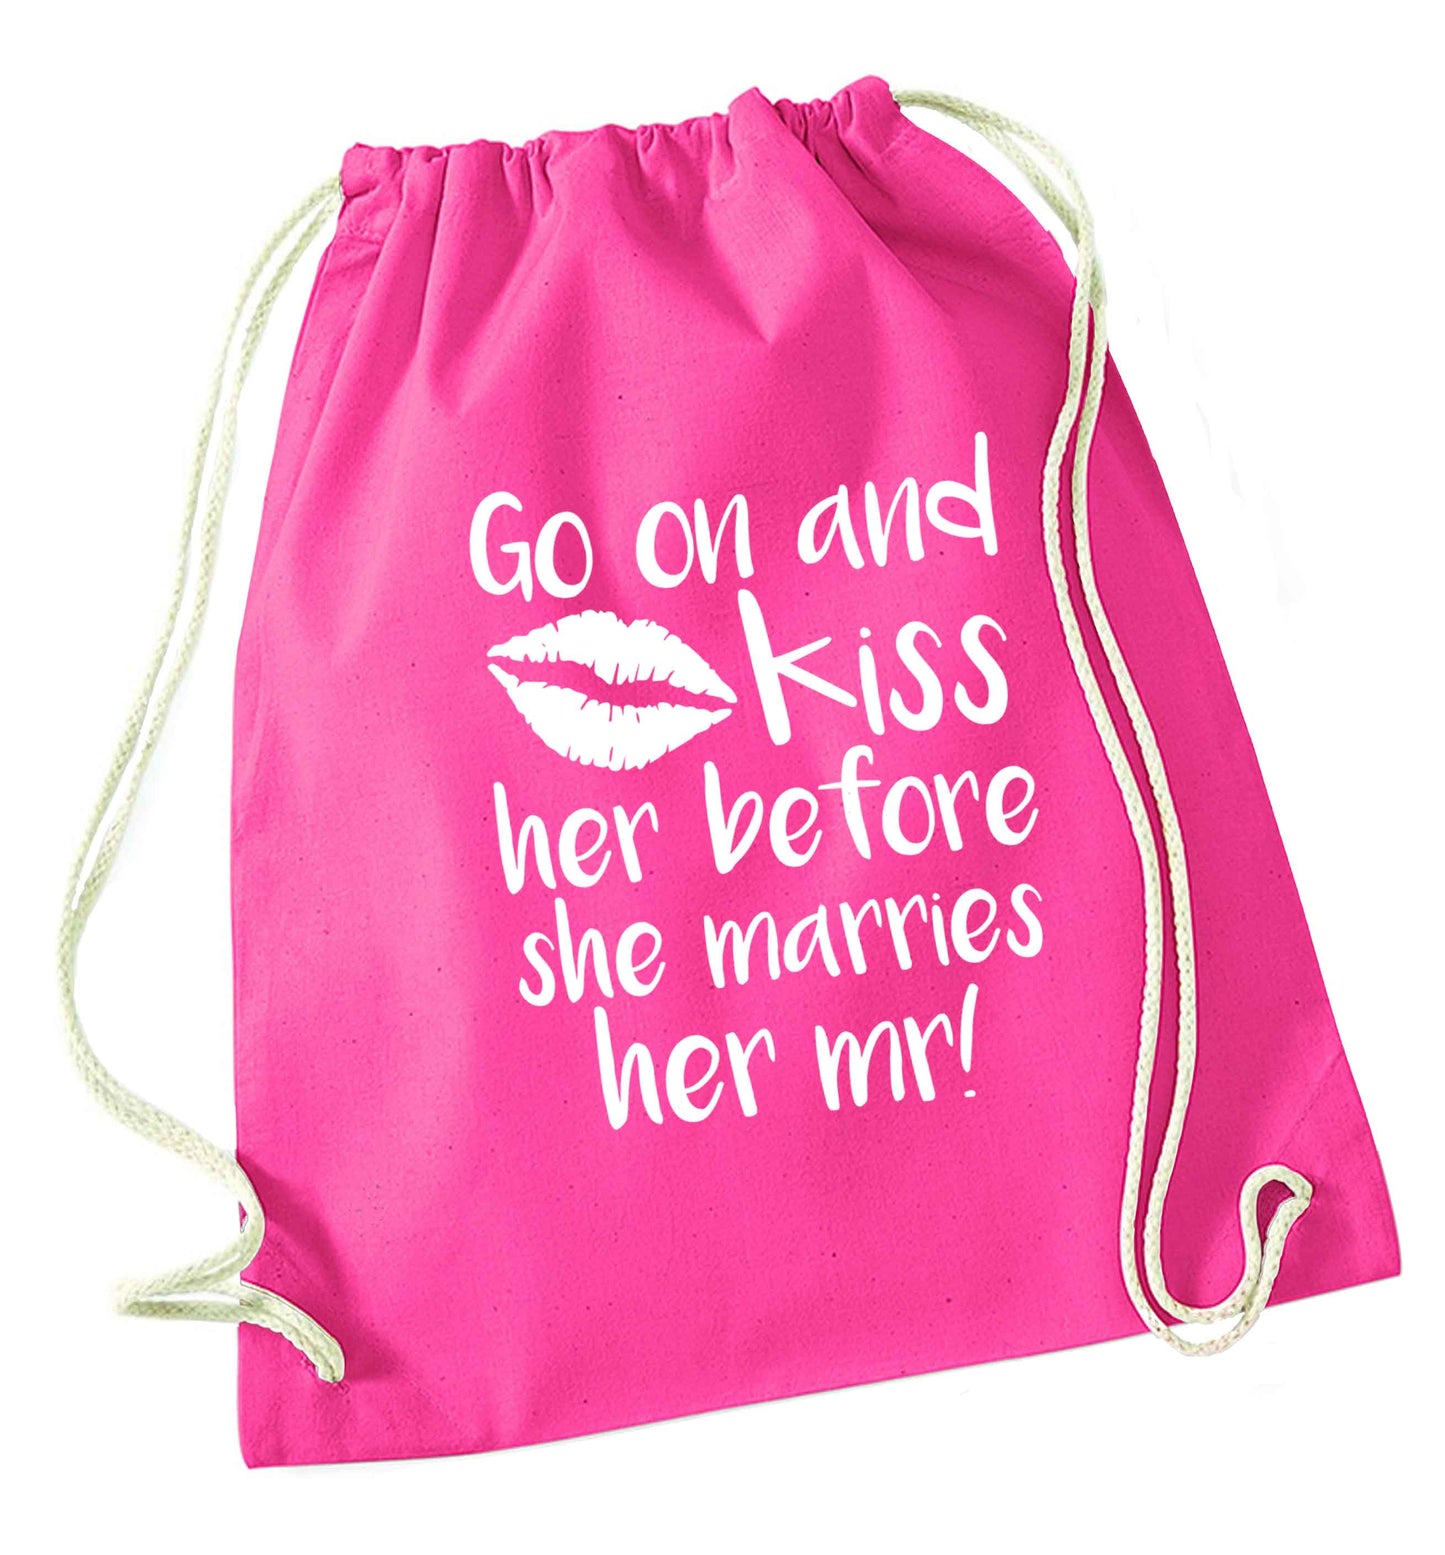 Kiss her before she marries her mr! pink drawstring bag